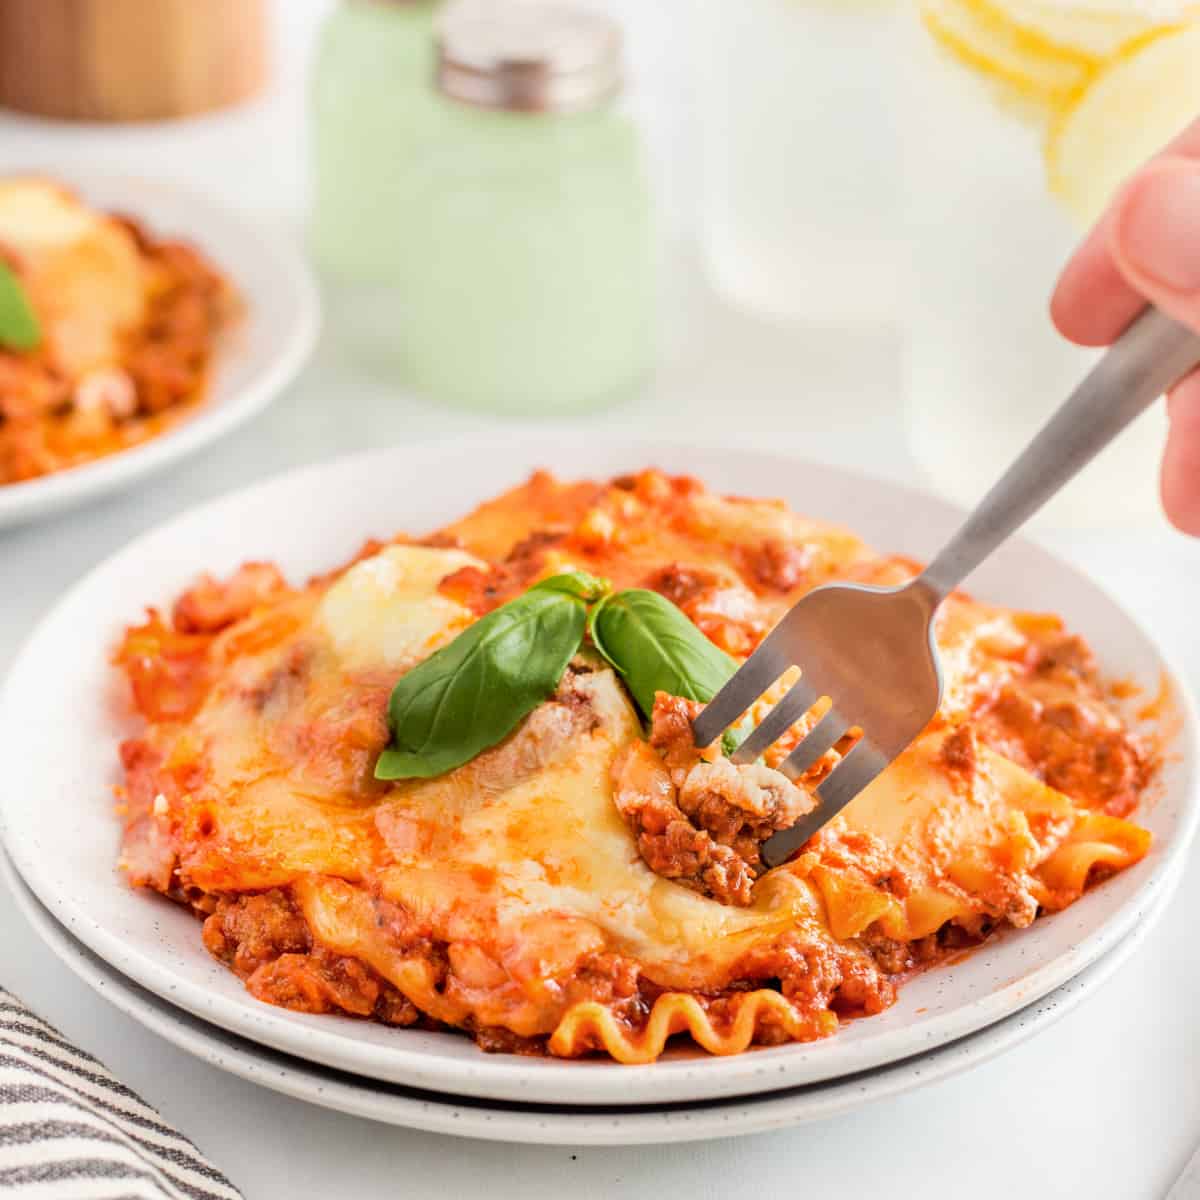 Sticking a fork into a plate of skillet lasagna